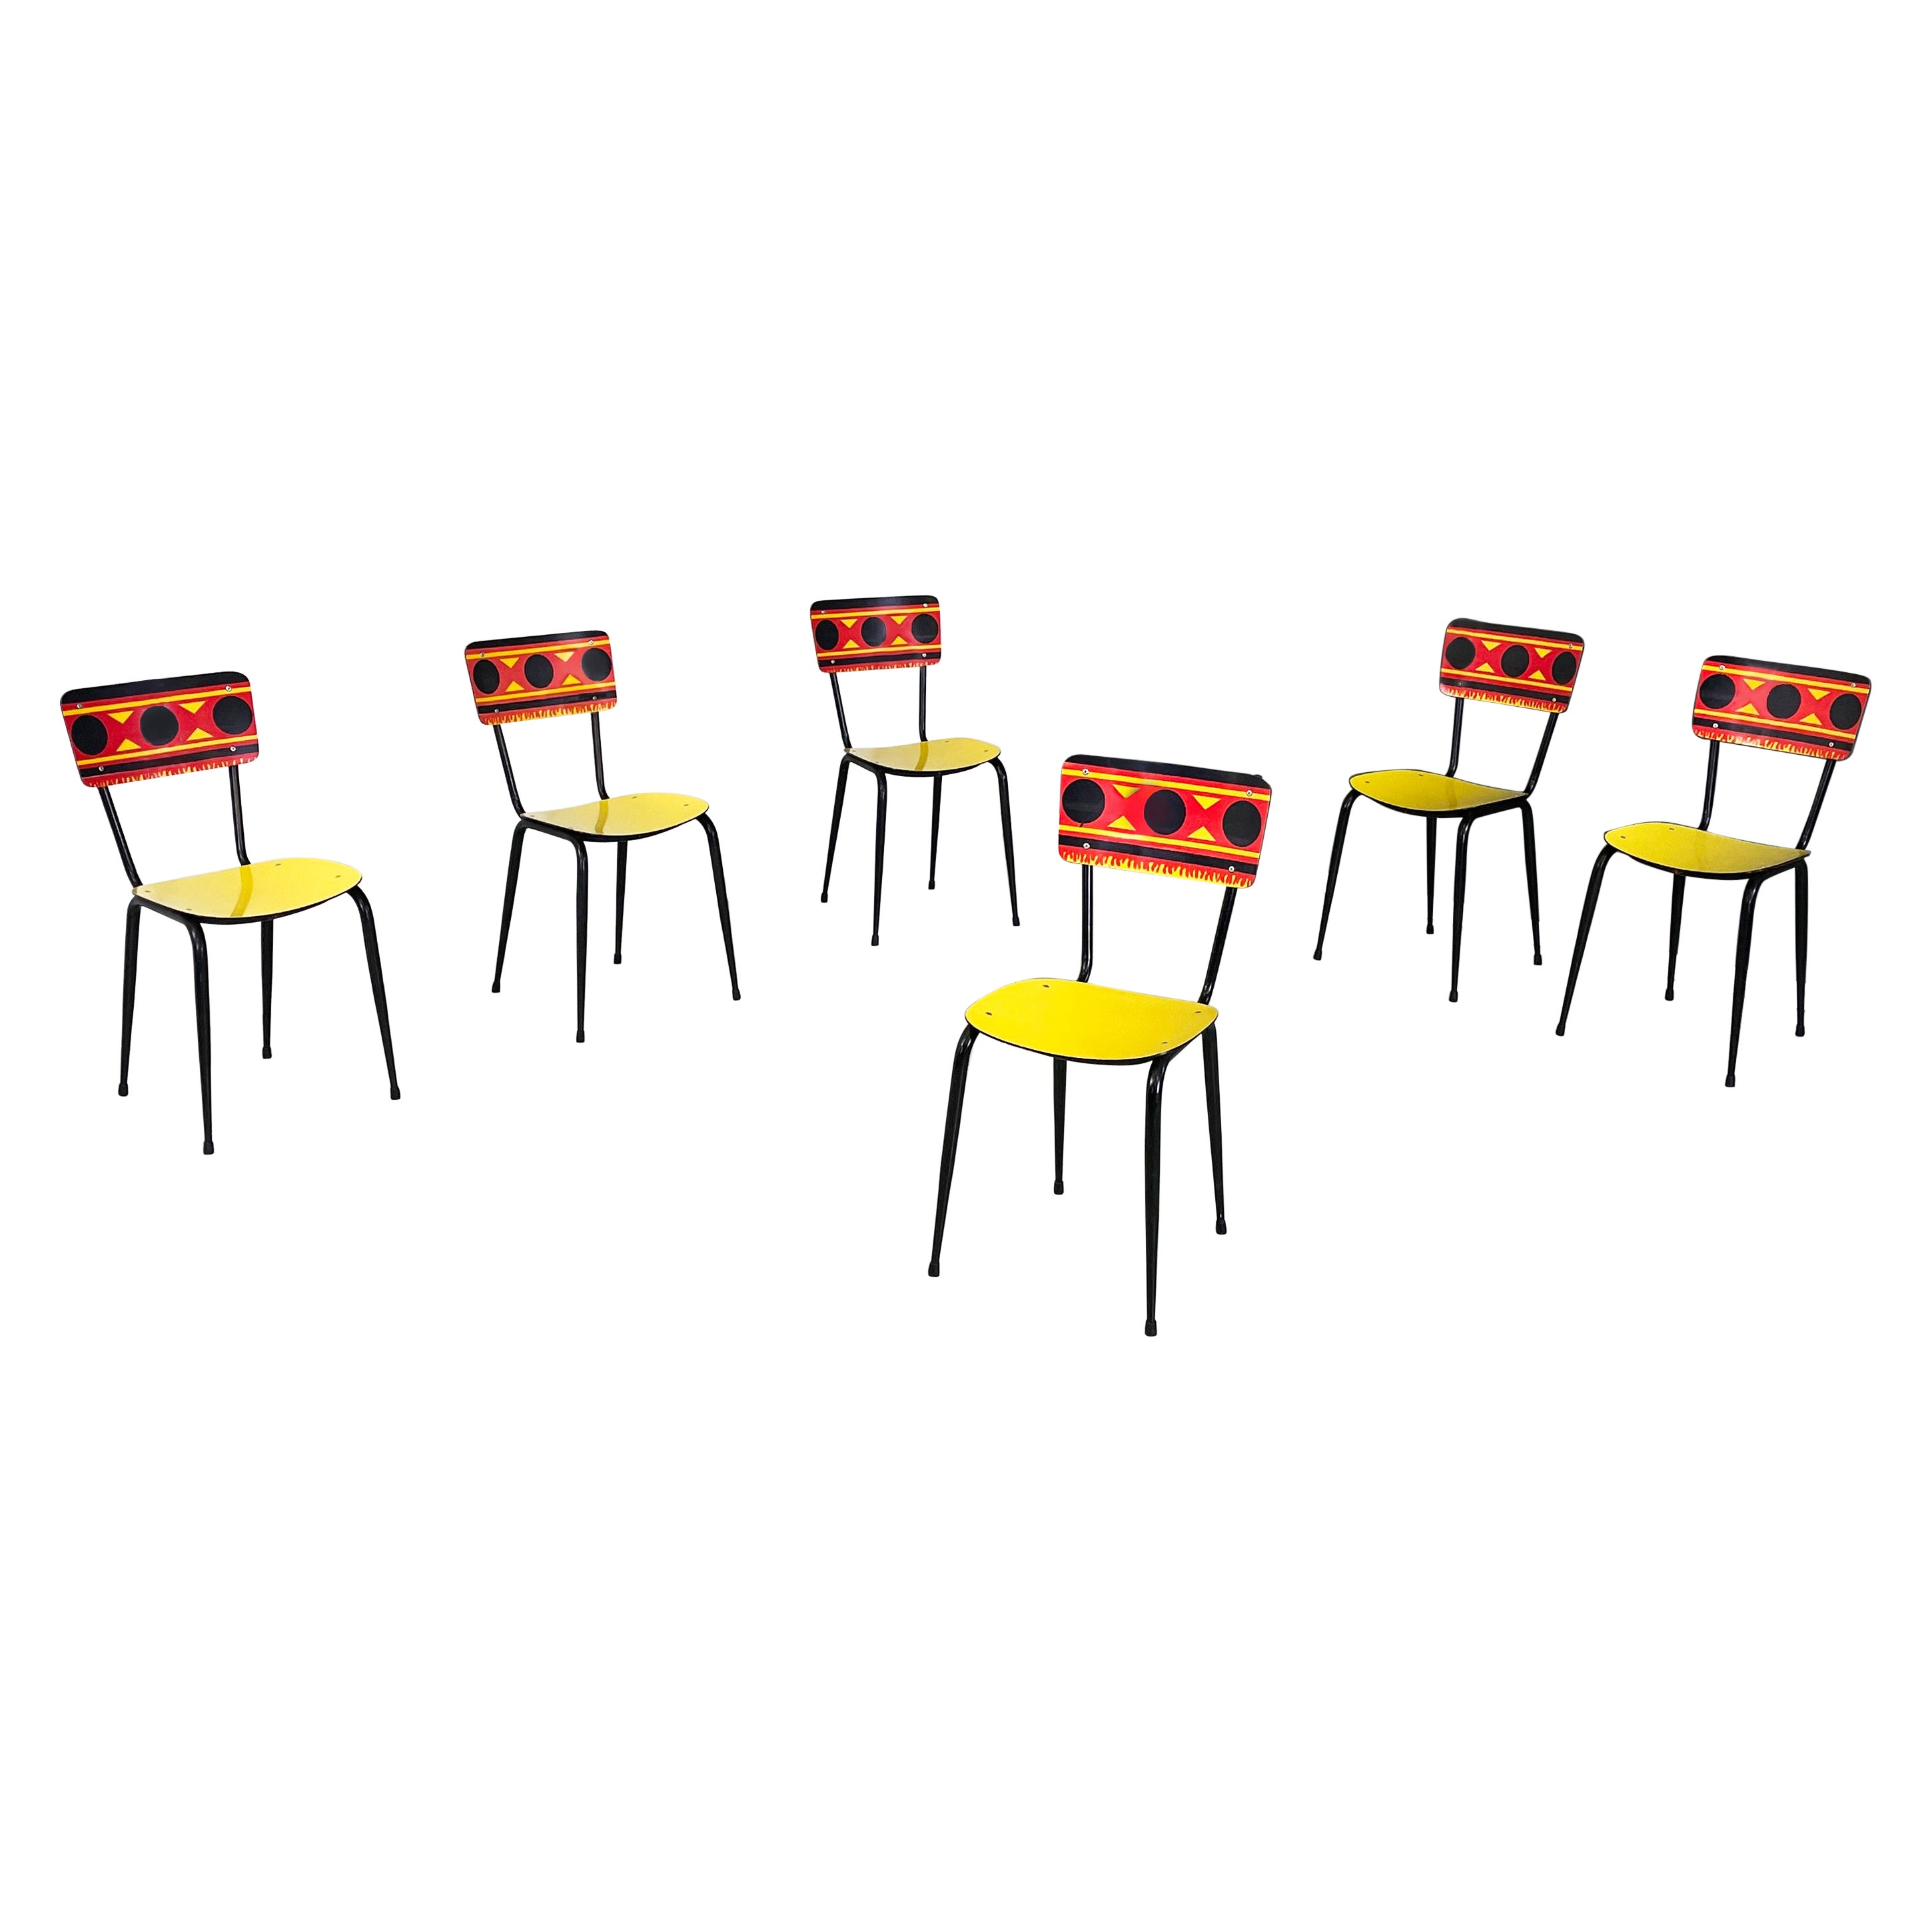 Italian mid-century Chairs Paulista in yellow, red, black formica metal, 1960s For Sale